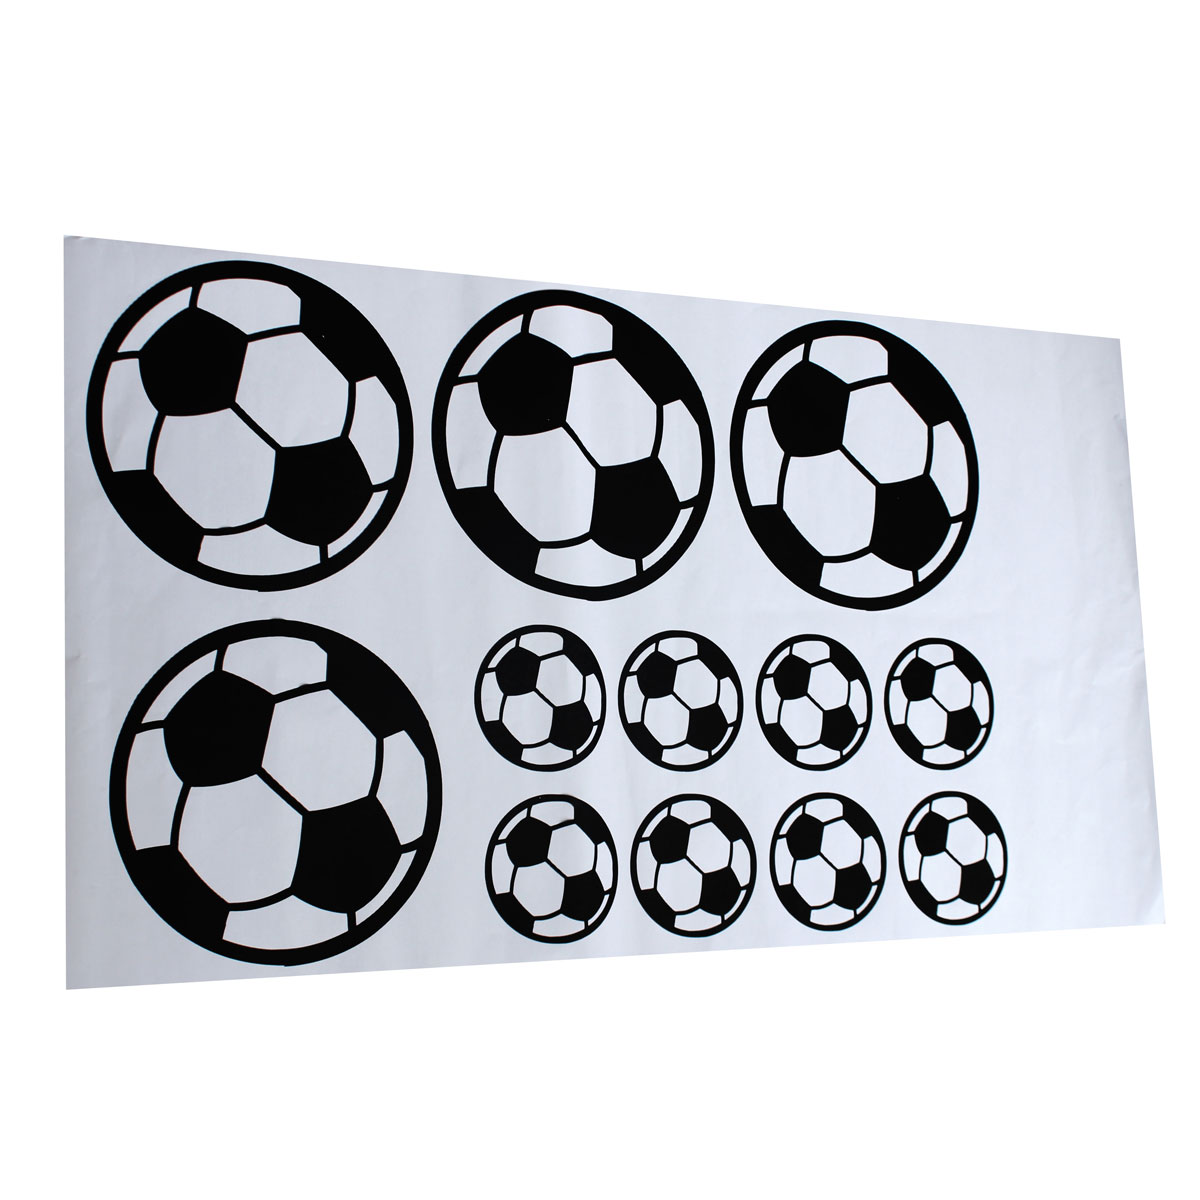 12PcsSet-Football-Soccer-Wall-Stickers-Children-Nursery-Kids-Room-Decals-Gift-Home-Decorations-1470248-5